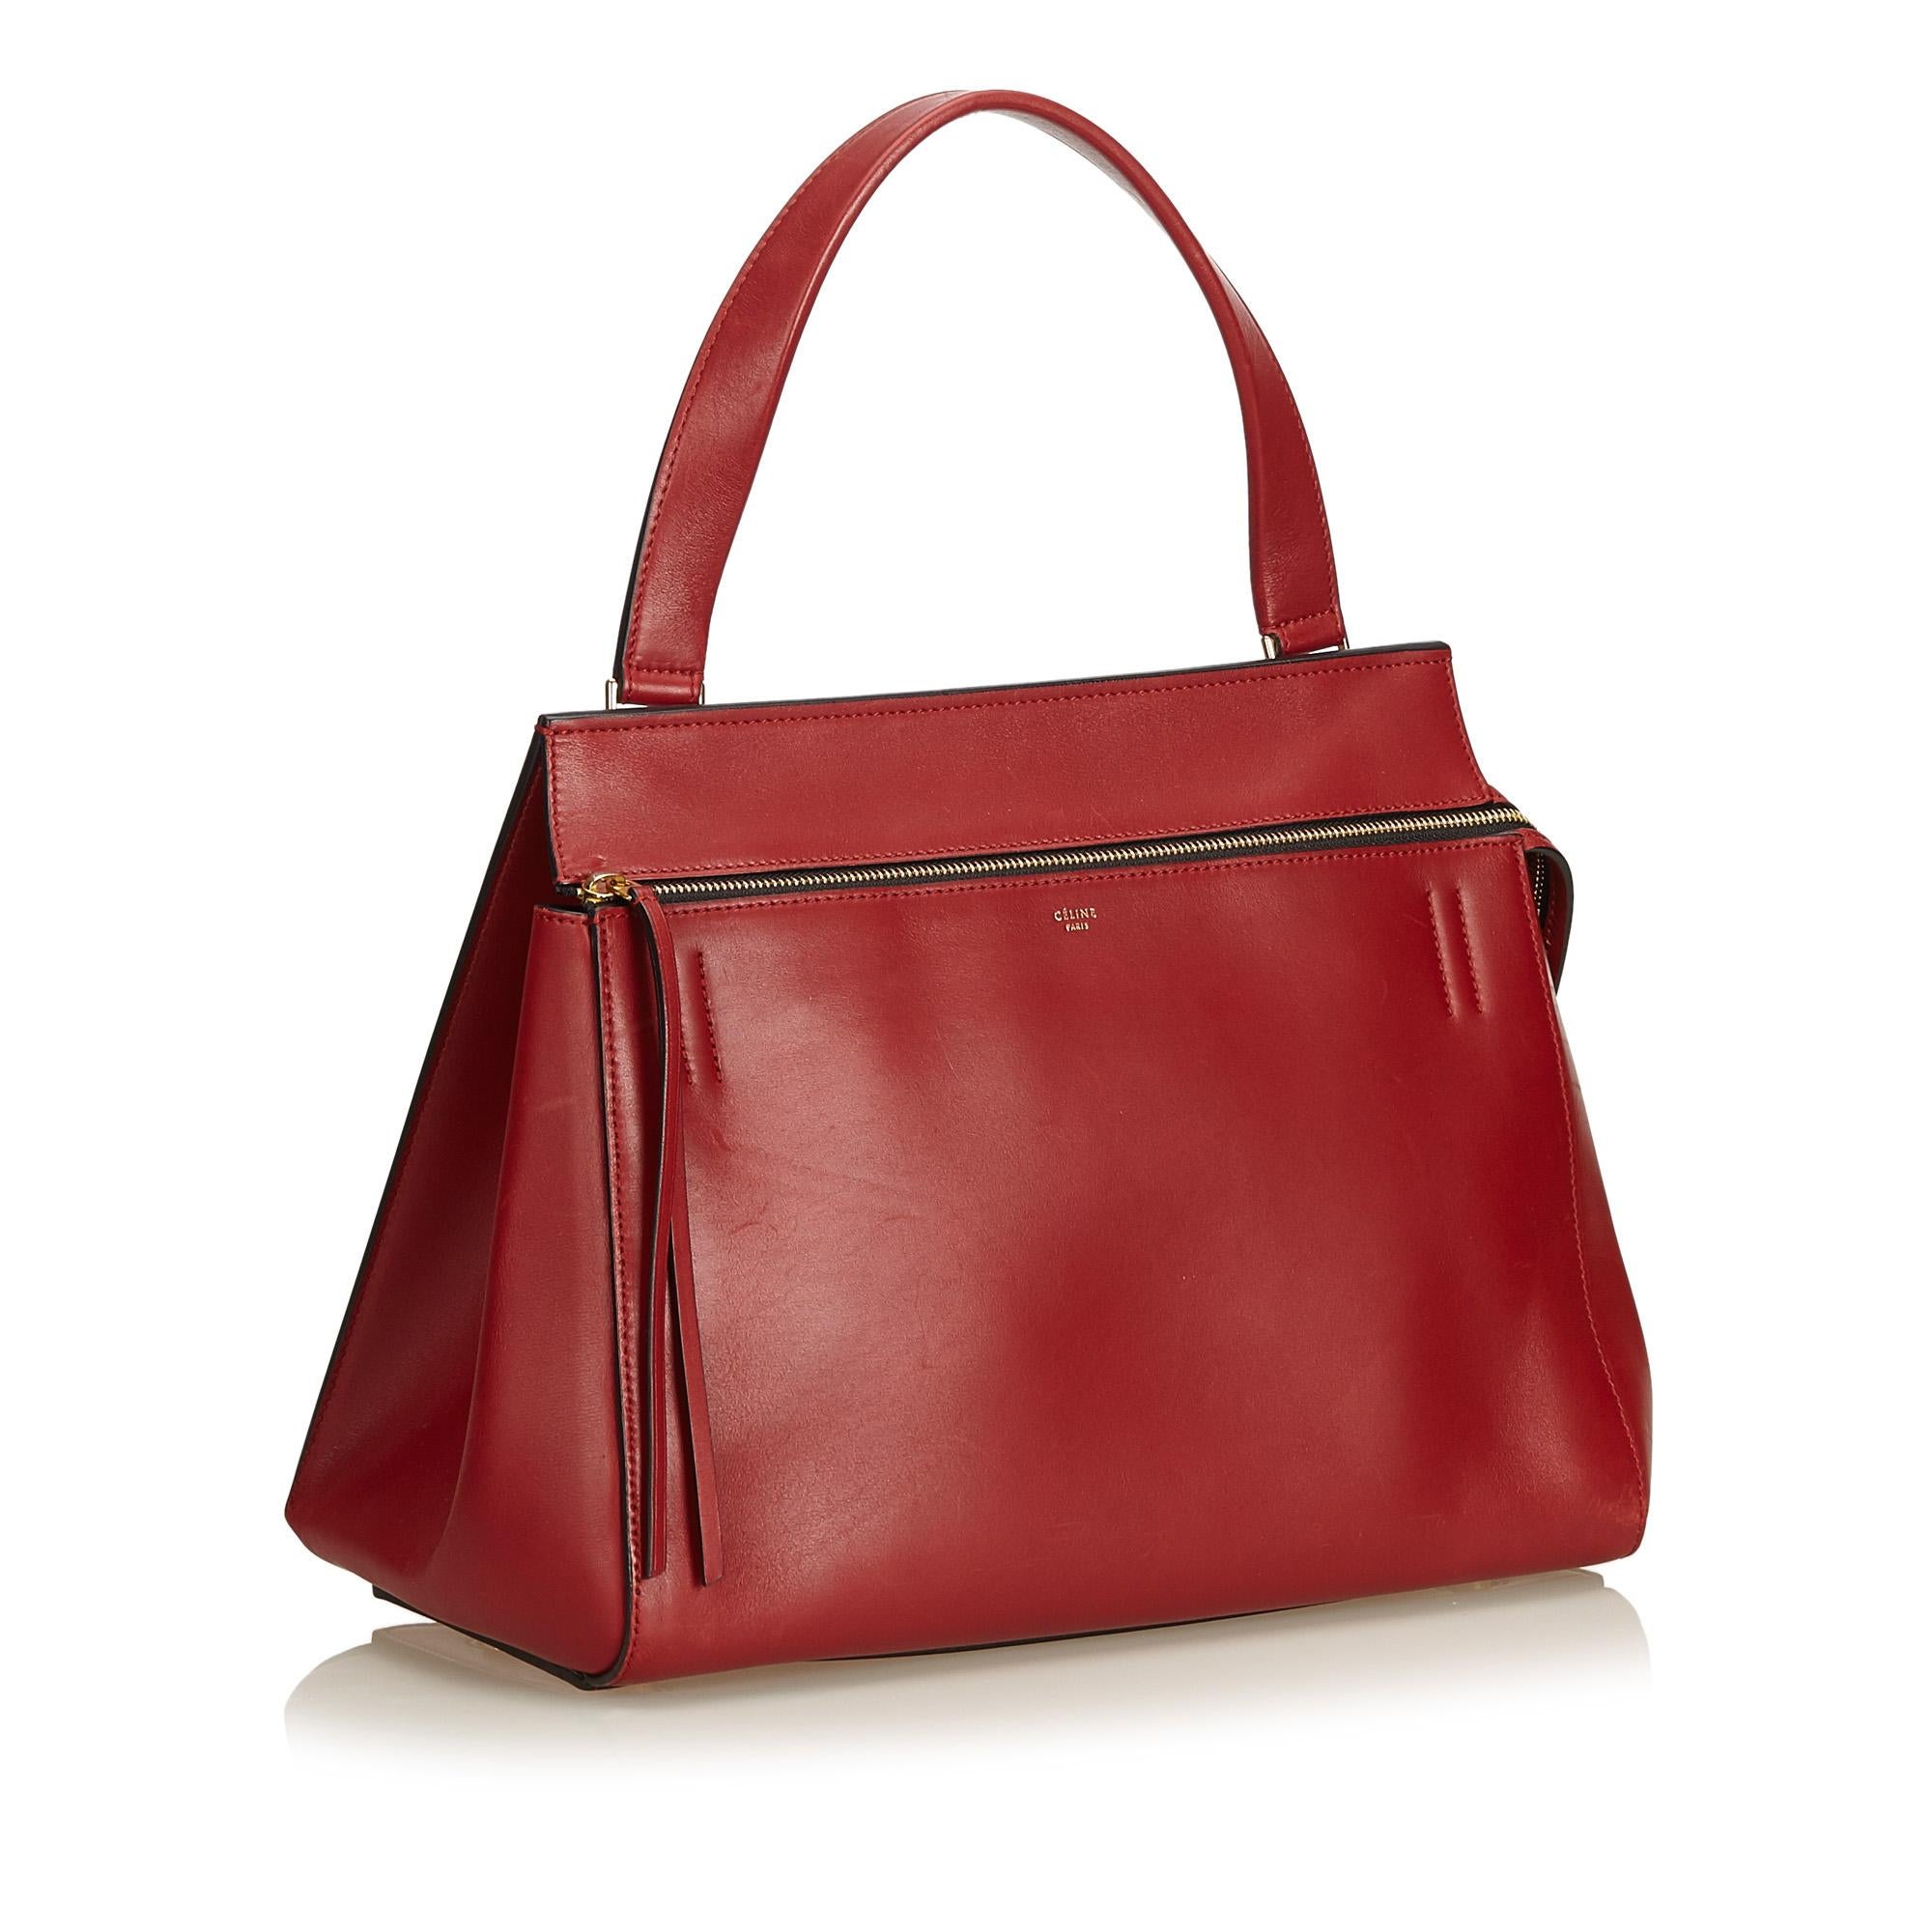 The Large Edge Bag features a leather body, exterior front zip pocket, back slip pocket, flat leather handles, top zip closure, and interior slip pockets. It carries as B+ condition rating.

Inclusions: 
Dust Bag

Dimensions:
Length: 27.00 cm
Width: